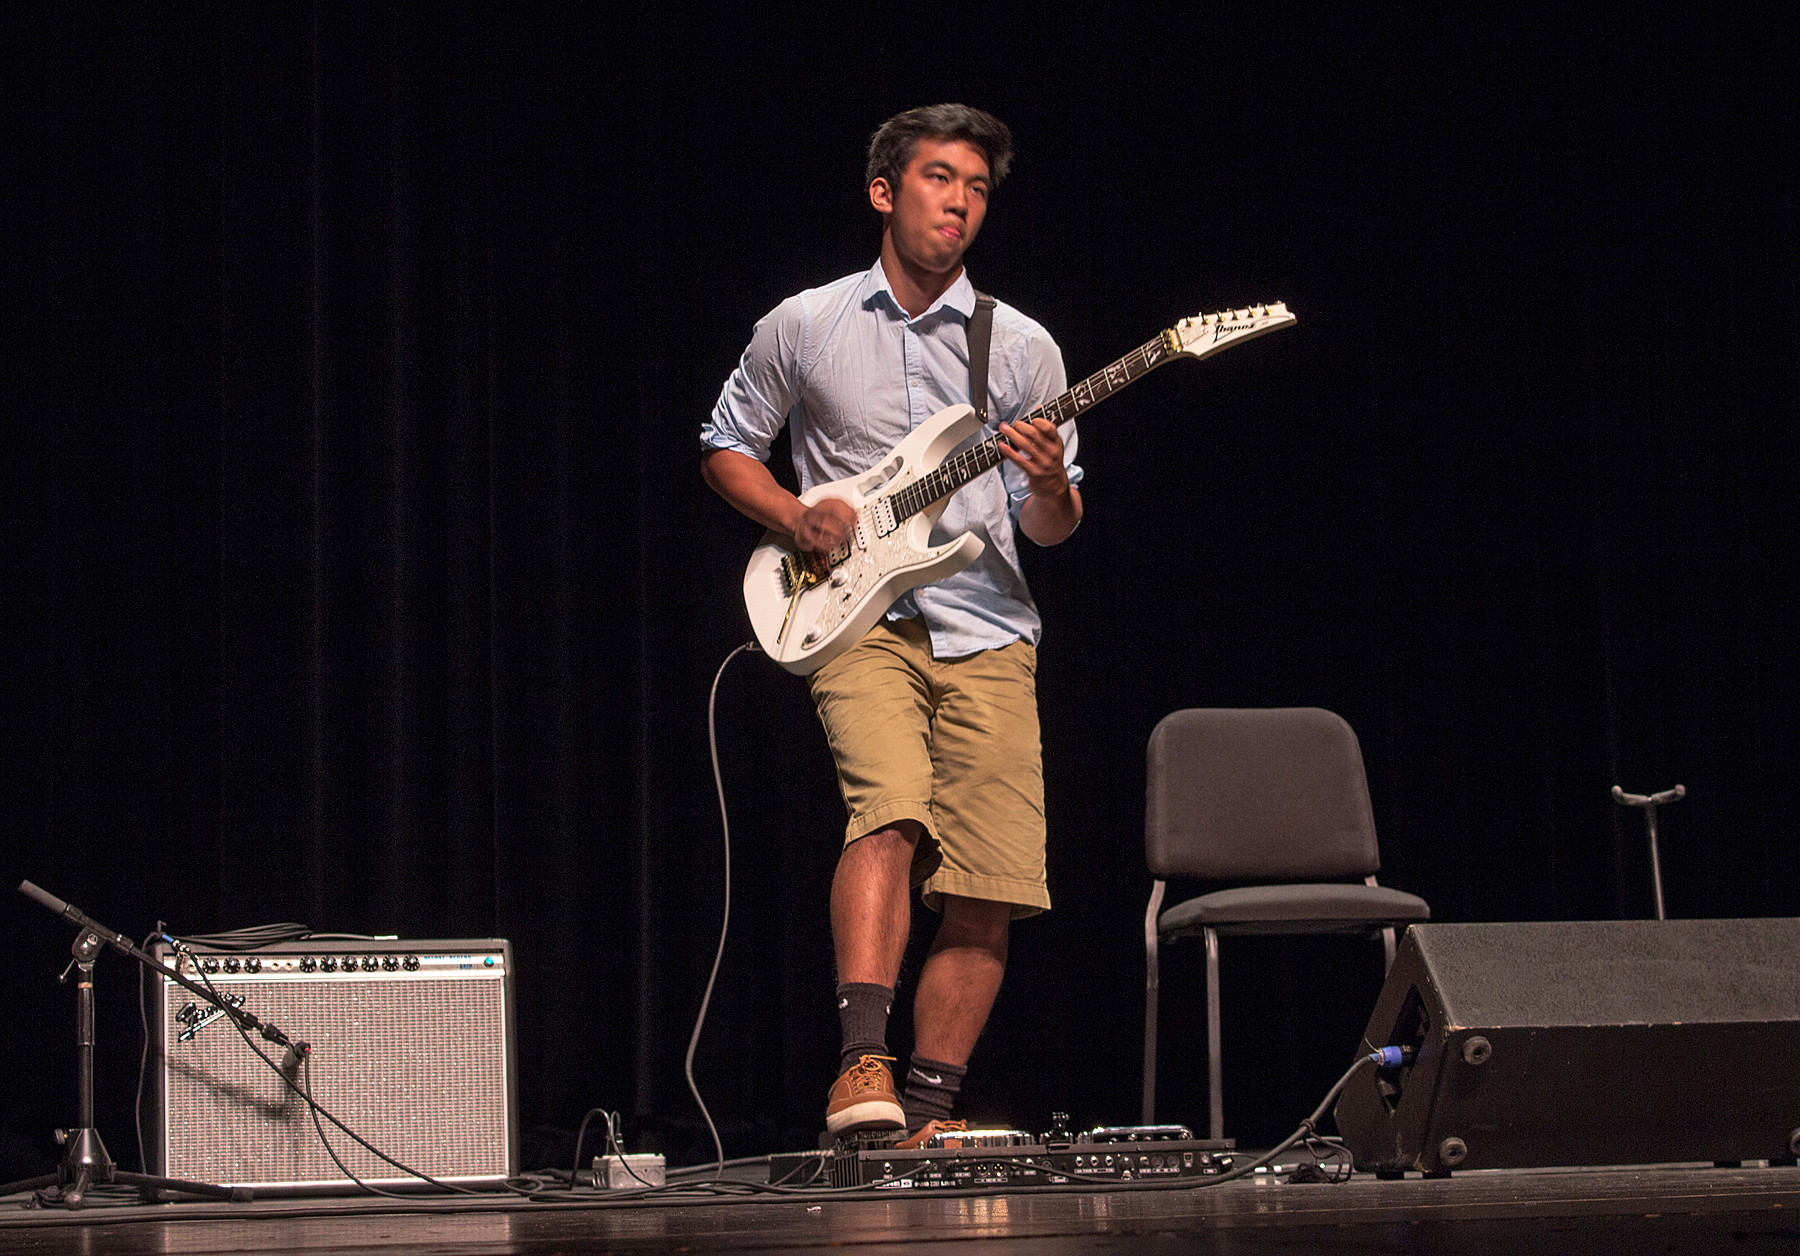 Competitor Mark Mendoza (Whitefish Bay, WI) in the Rock/Blues semi-final rounds at the Wilson Center Guitar Competition & Festival, Thursday, Aug. 13, 2015. Mark was awarded third place in his genre.